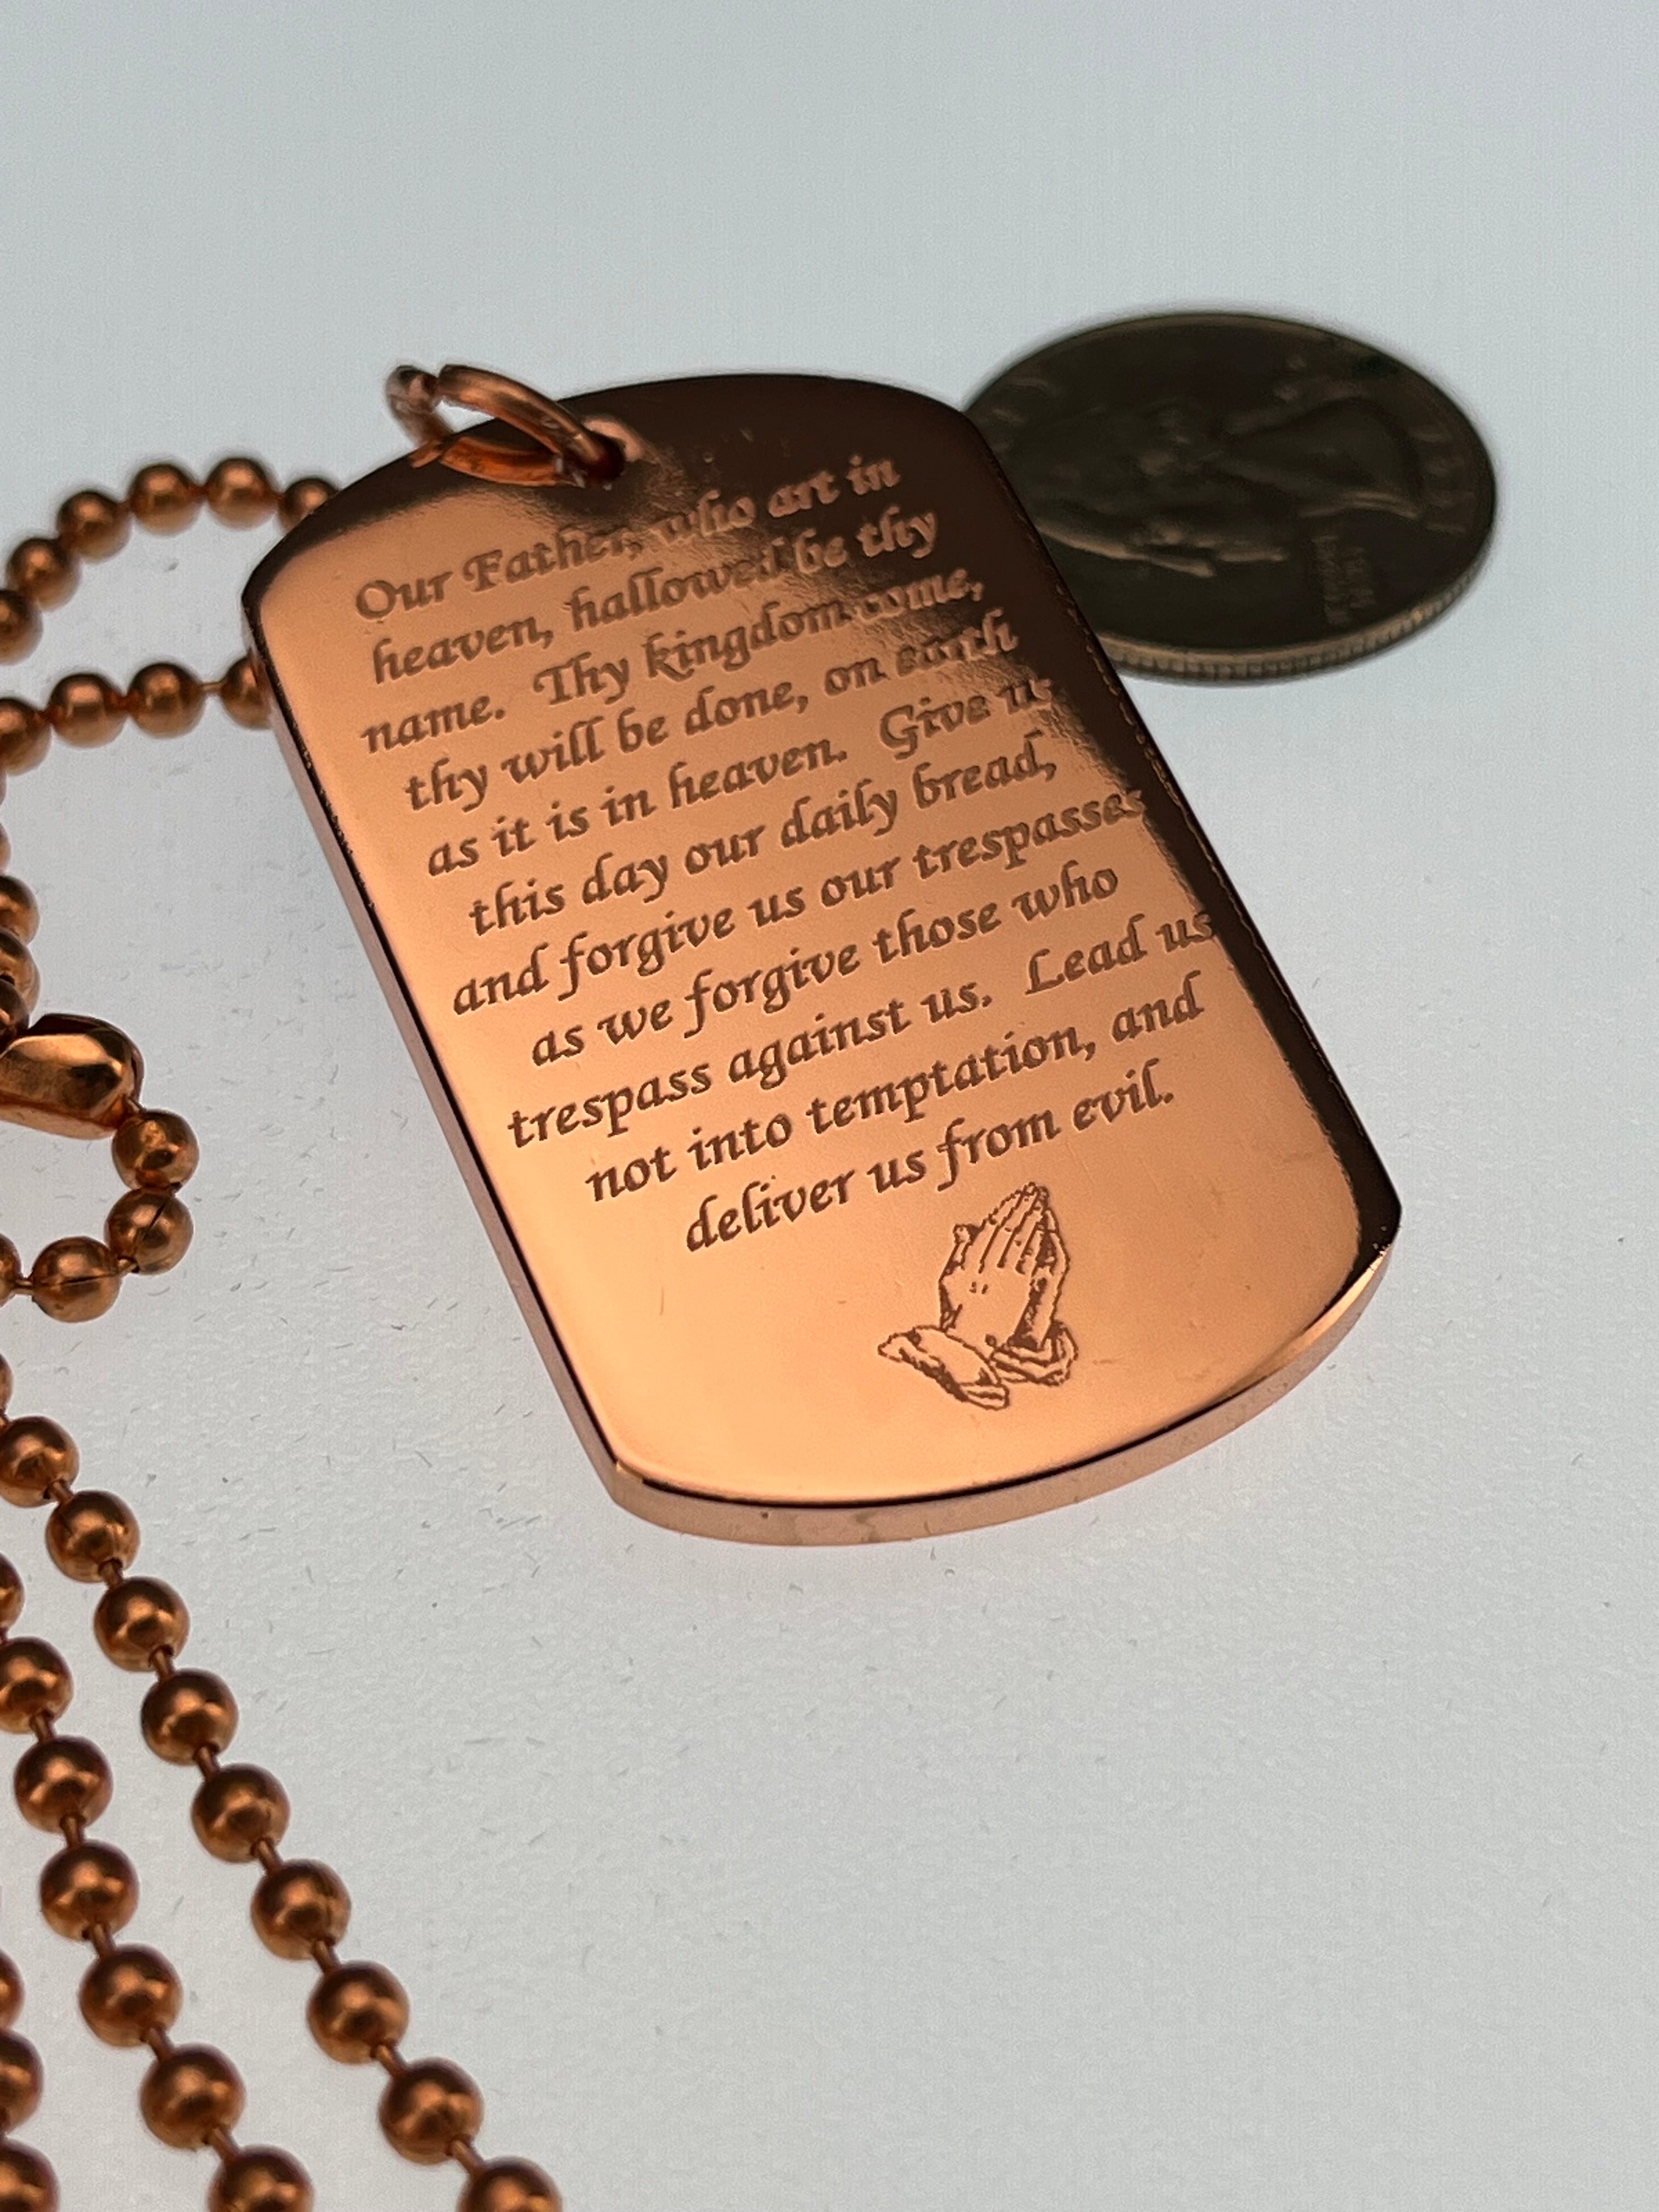 LORDS PRAYER OUR FATHER PRAYER RELIGION SOLID COPPER DOG TAG PENDANT necklace